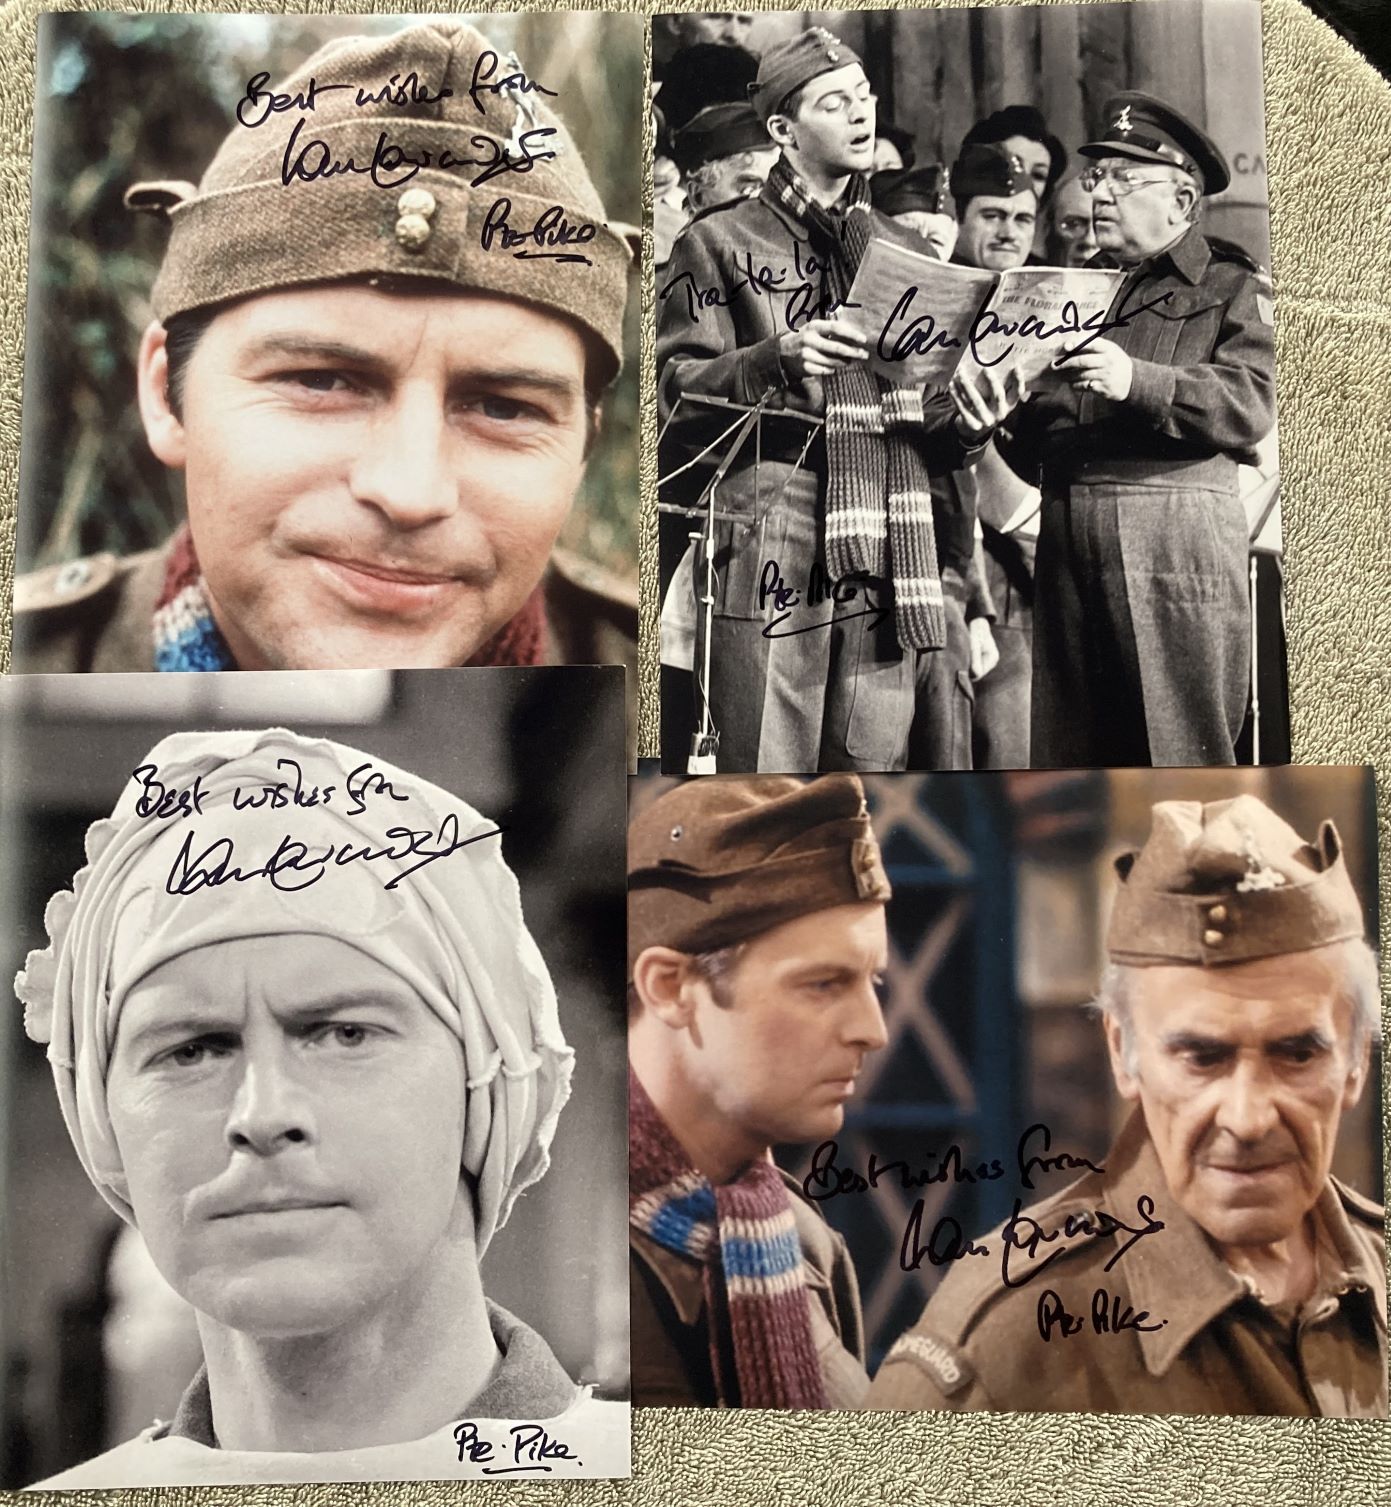 Dads Army signed collection of four 10 x 8 inch photos signed by Ian Lavender as Private Pike, all